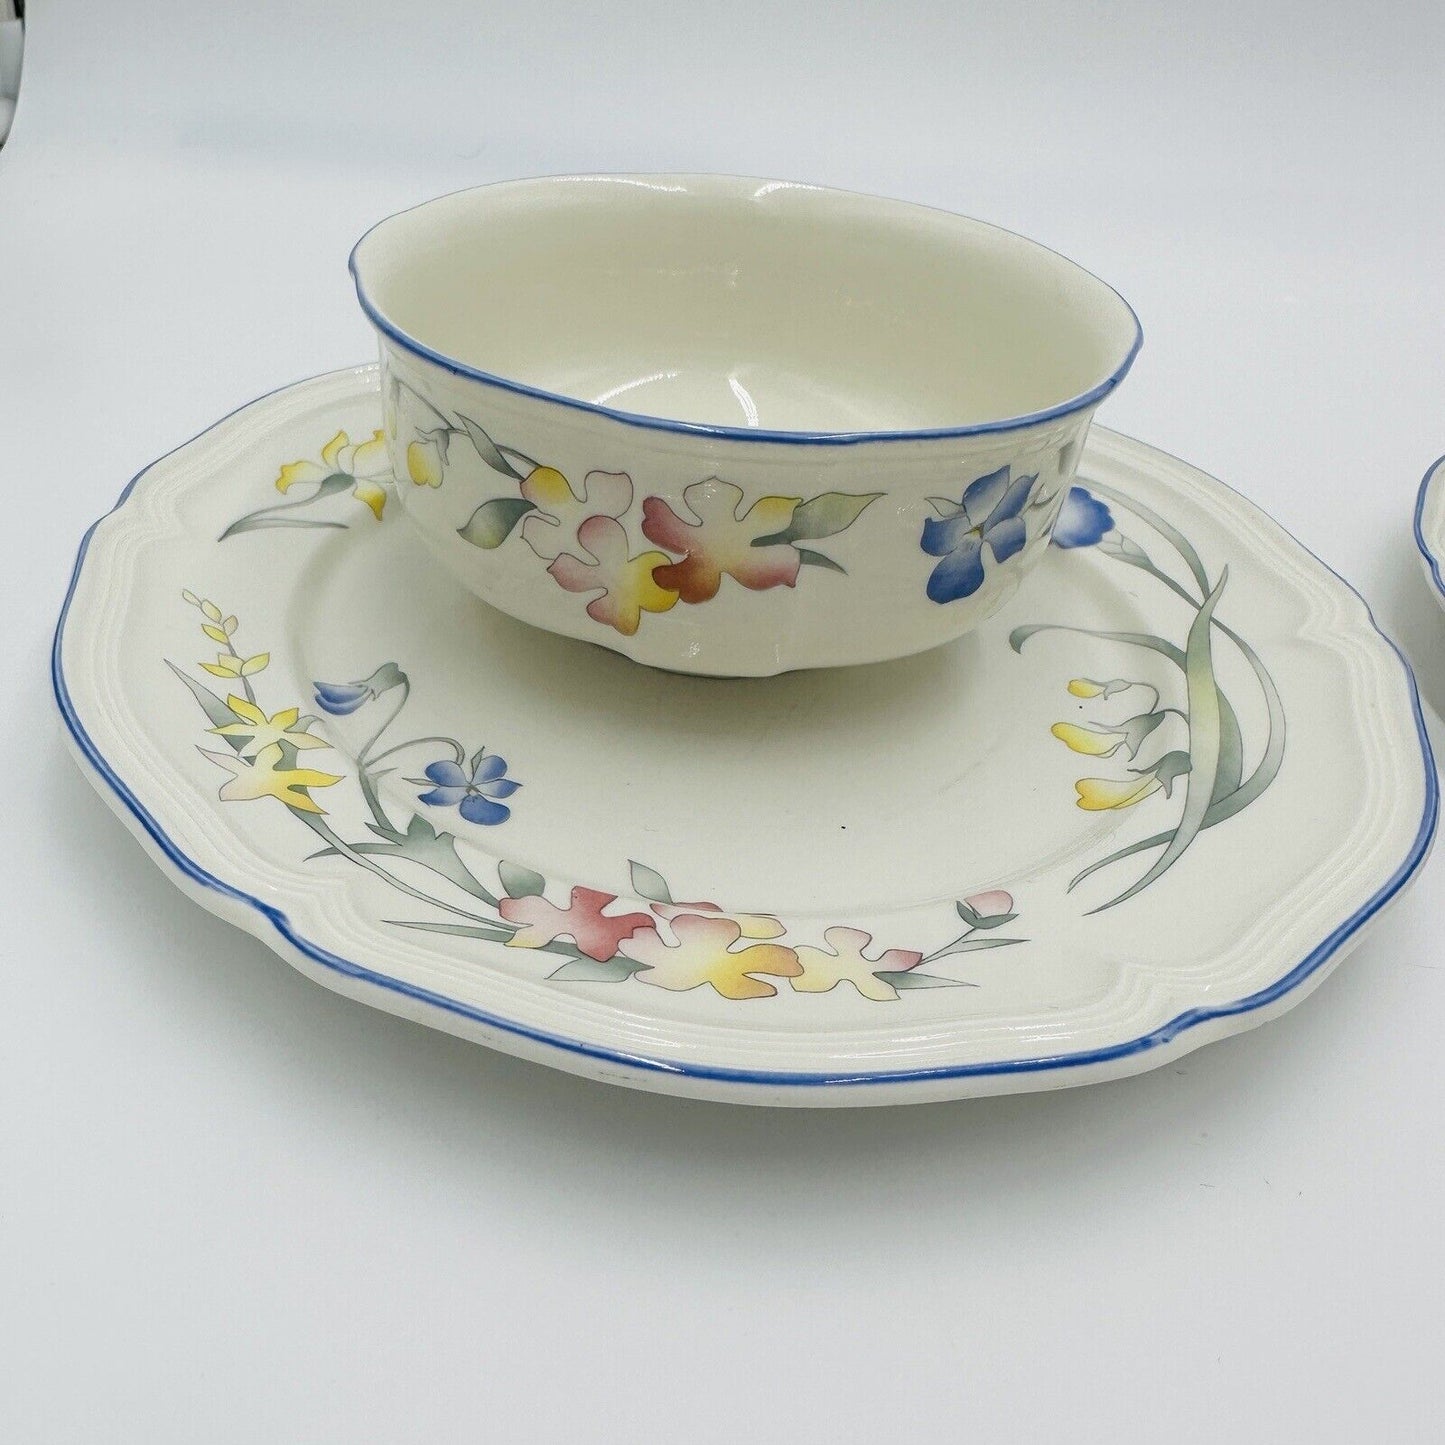 Villeroy & Boch Riviera Bowl and Dish Dinnerware Porcelain Luxembourg Set Serve